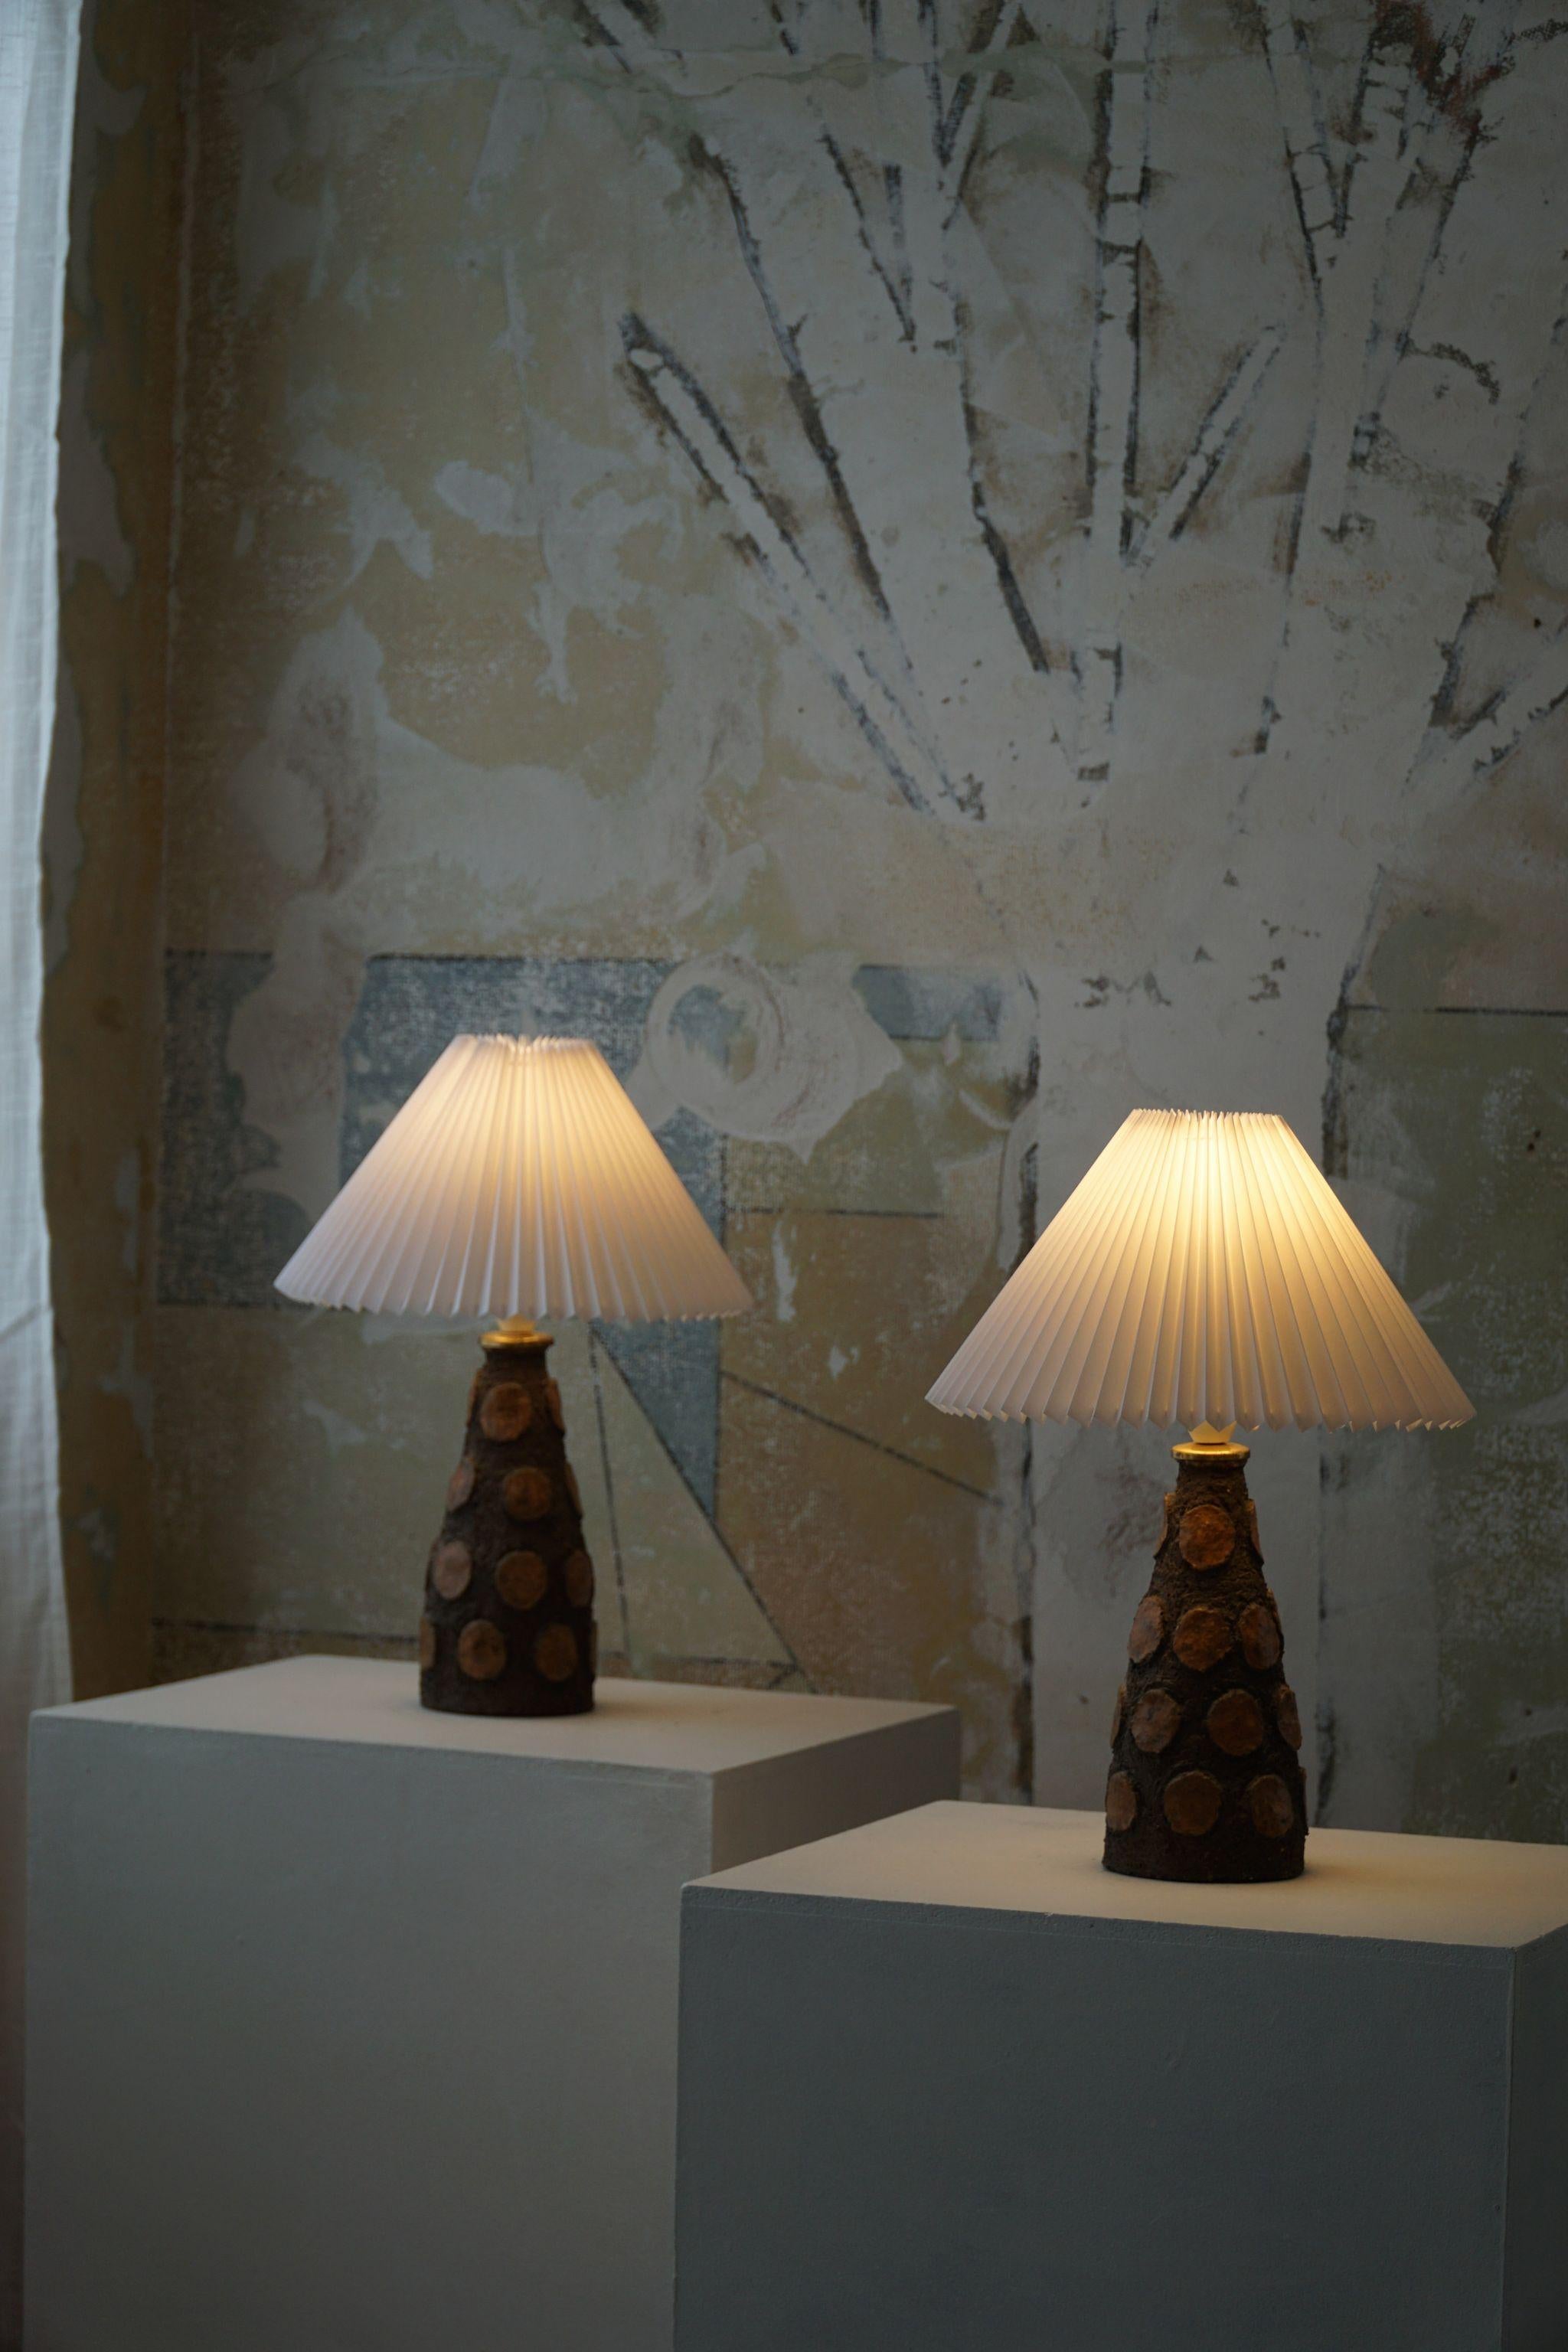 Pair of handmade table lamps, made by a unknown Danish artist, stamped R N. A fine experimental craftsmanship of the 1970s in great vintage condition. Made in various brown & orange colors.

A beautiful vintage lamp well suited for the Modern